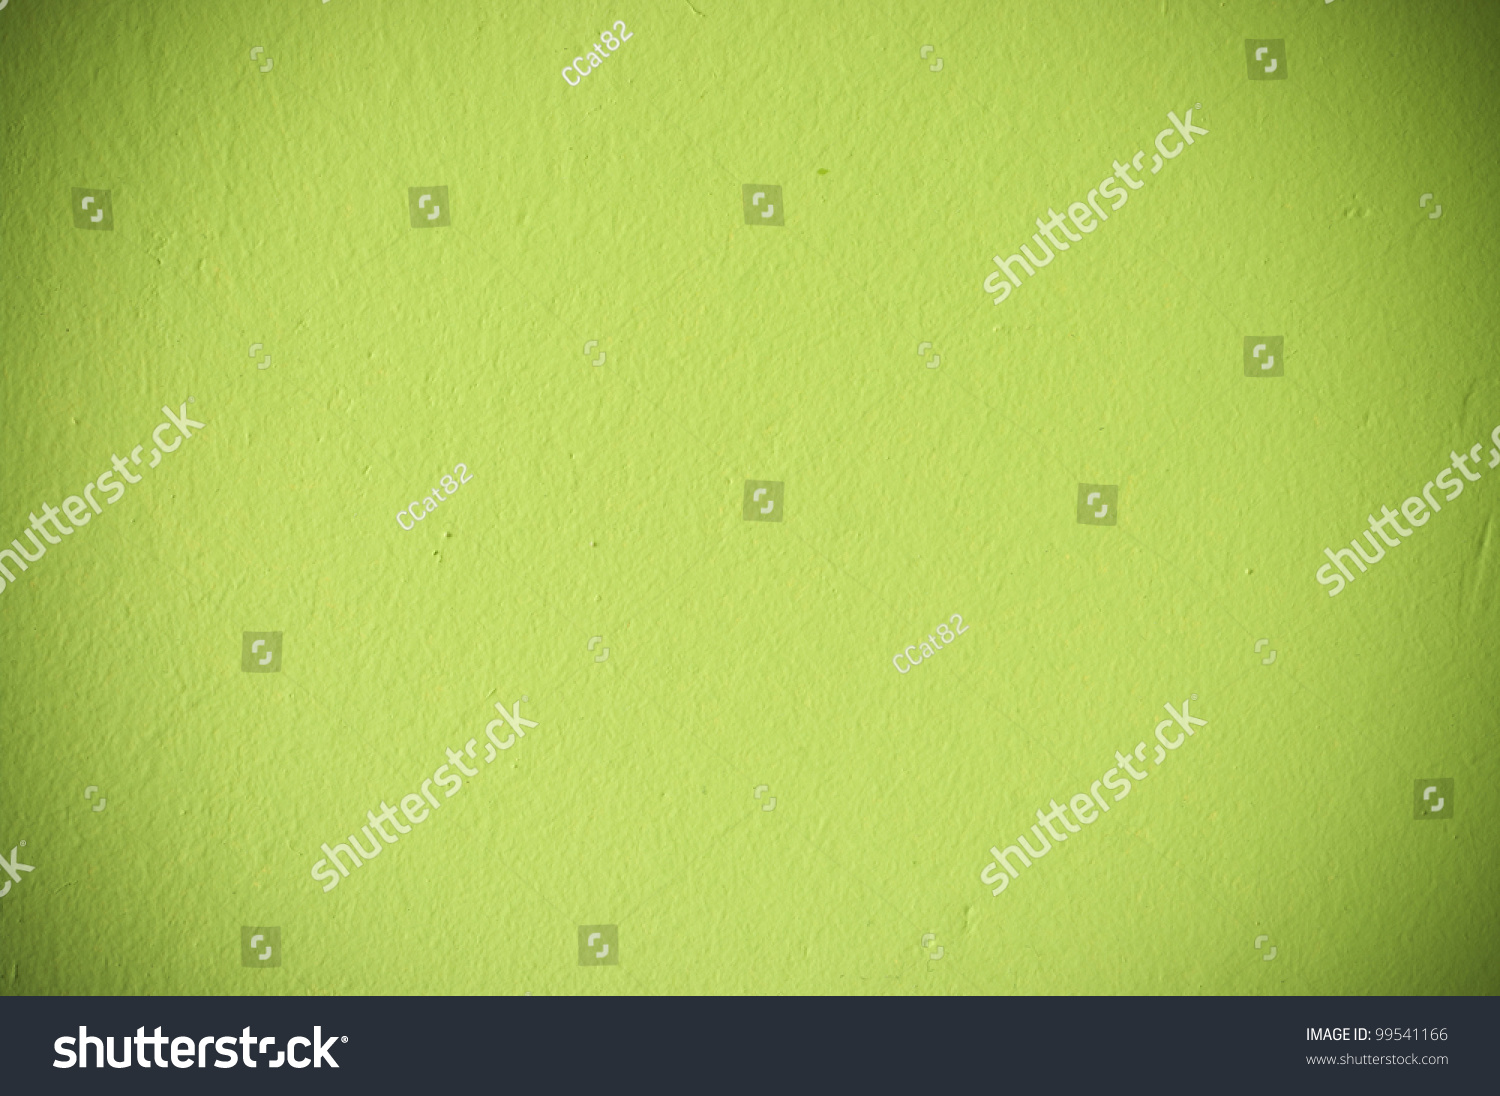 Green wall texture for background usage #99541166